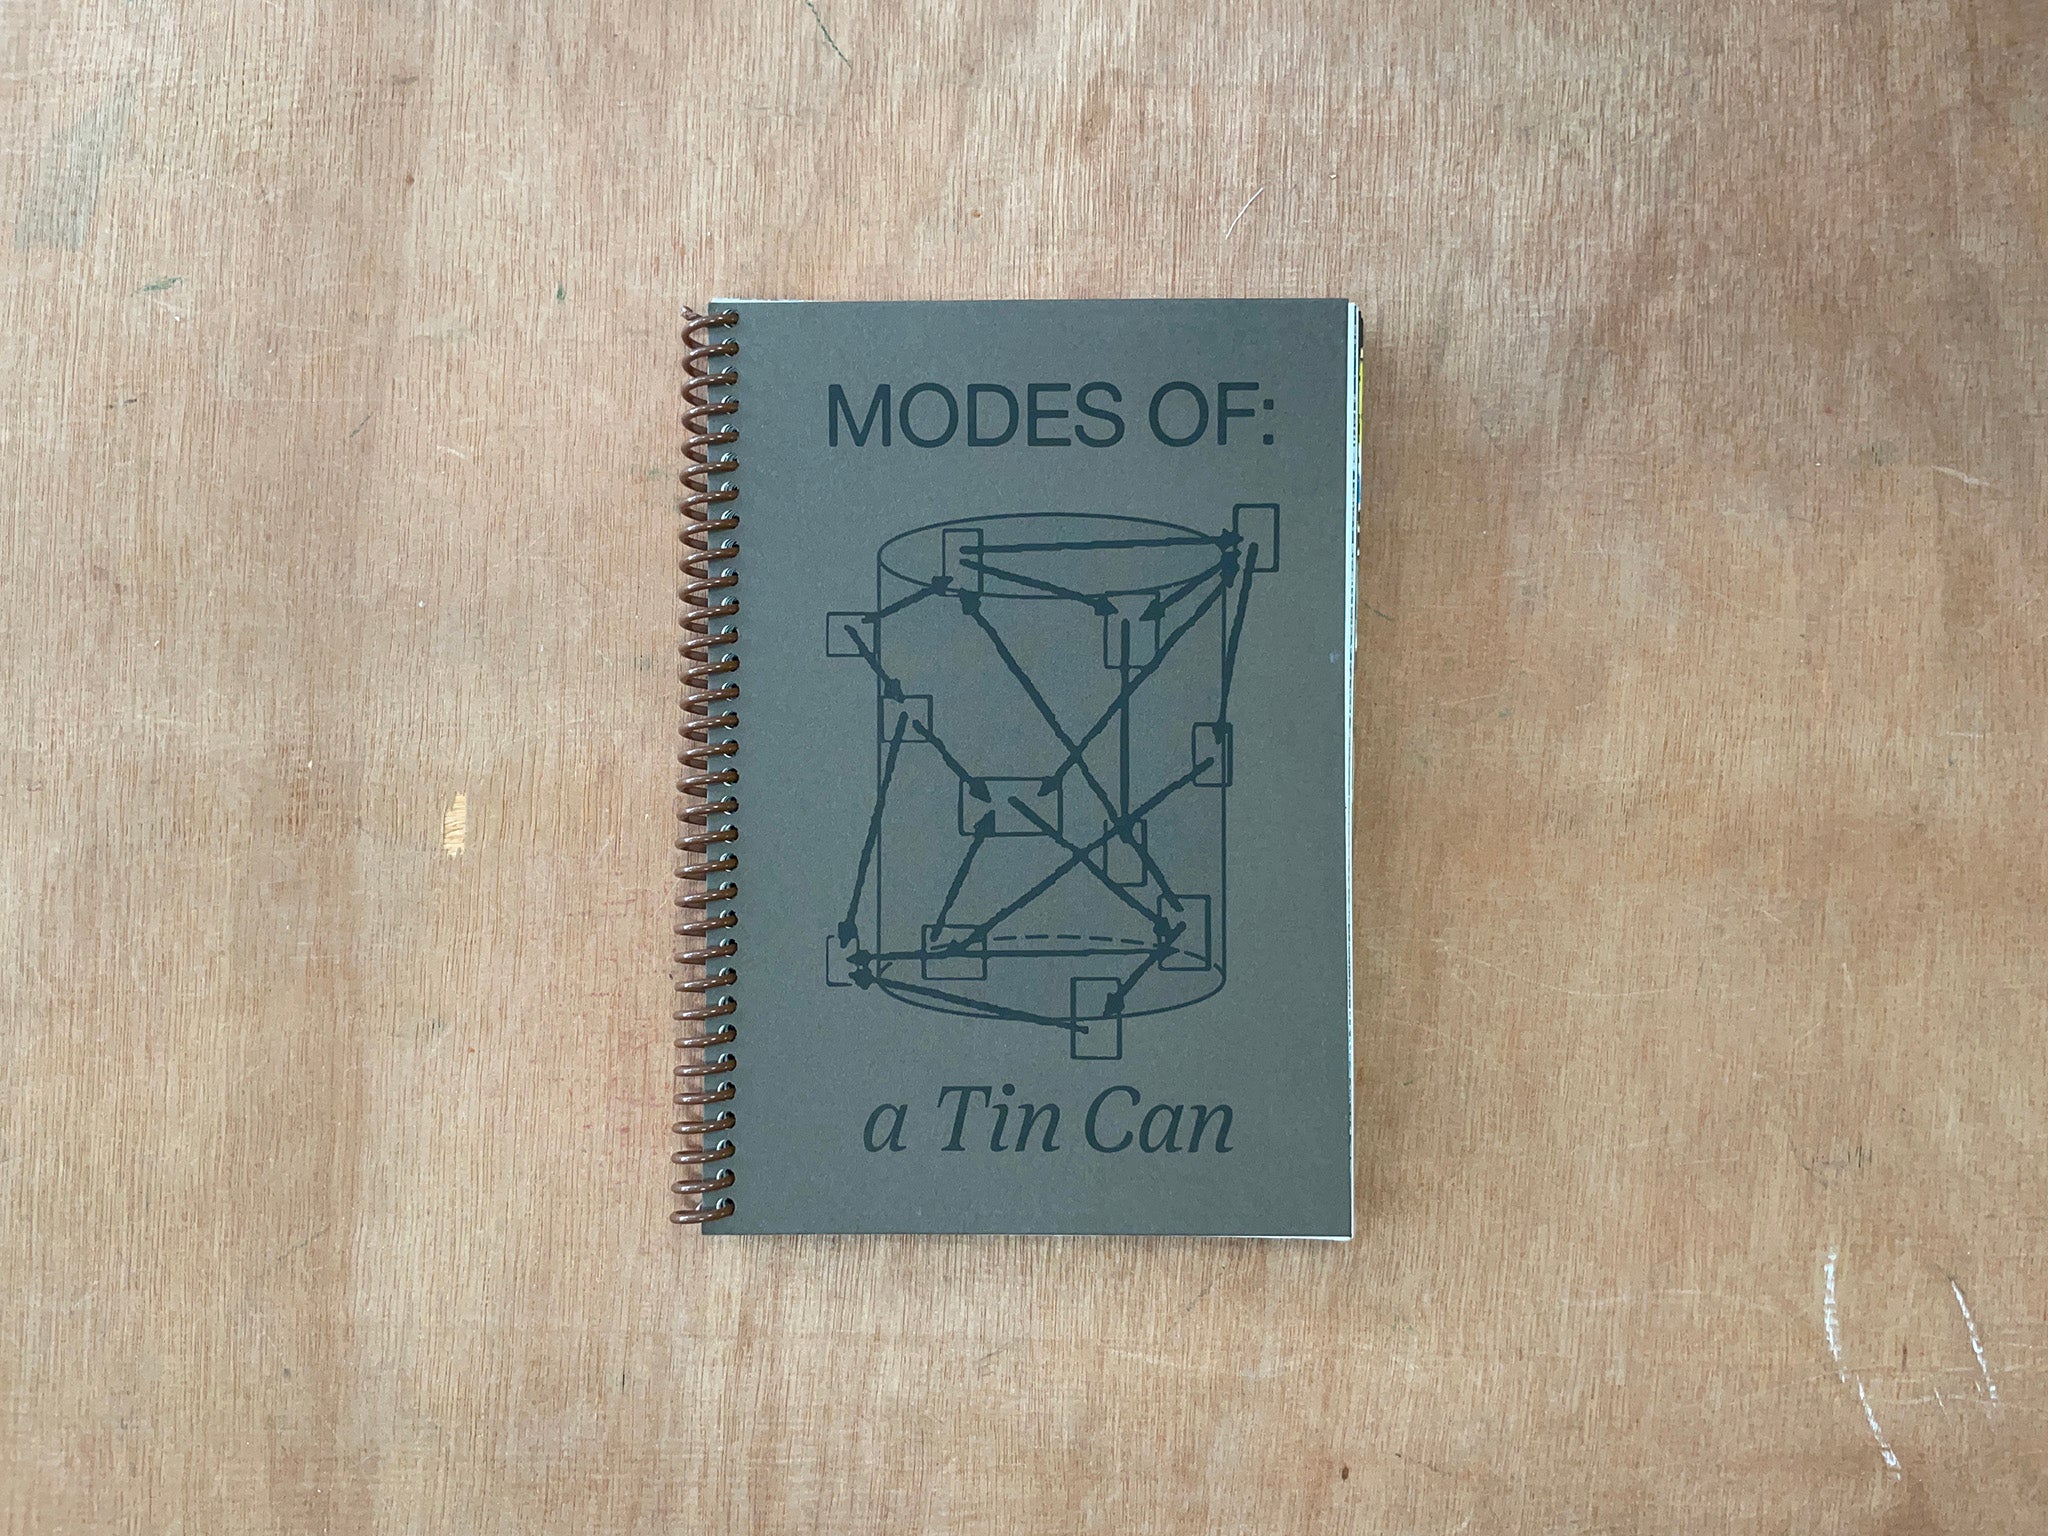 MODES OF: A TIN CAN by Various Artists